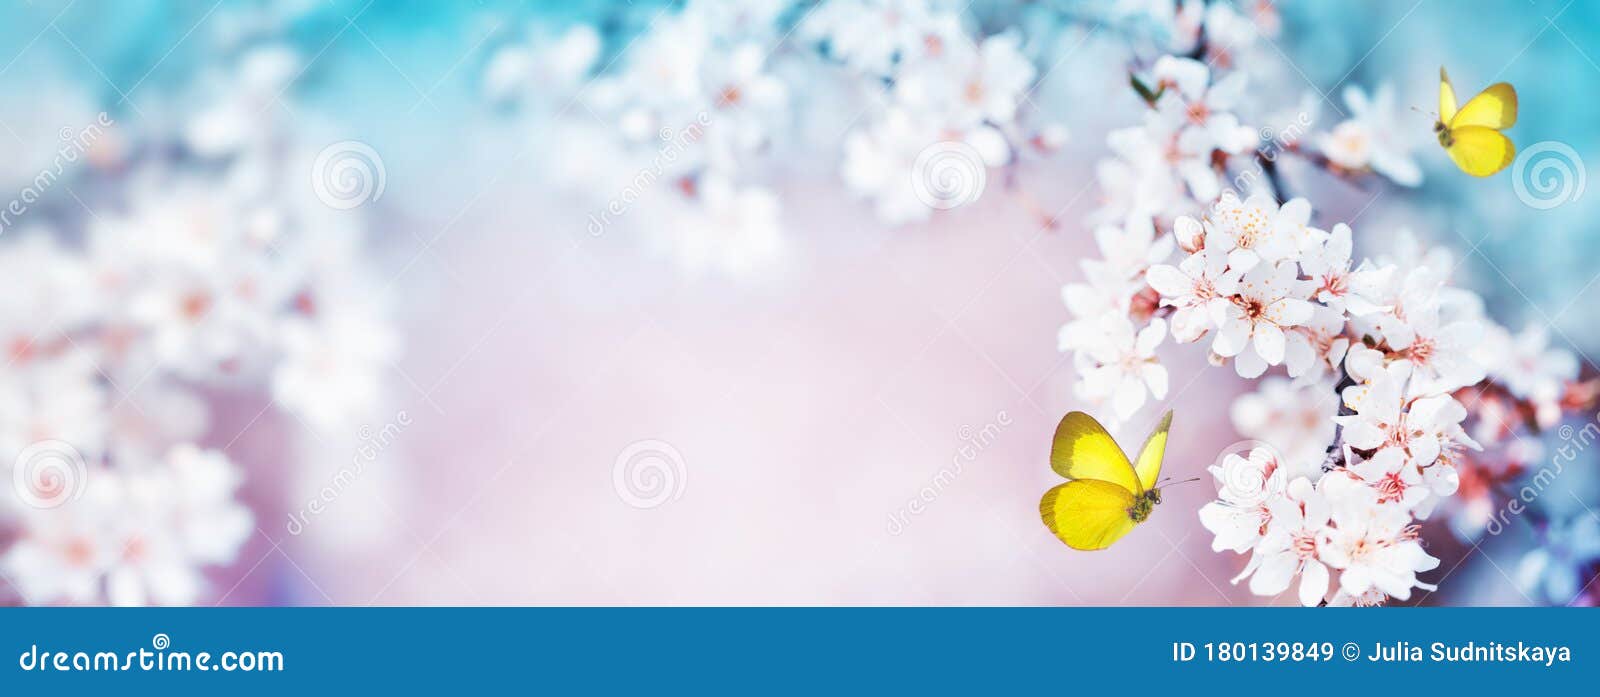 spring nature landscape with branches of blossoming cherry against pink blue background and flying butterflies. beautiful scene.